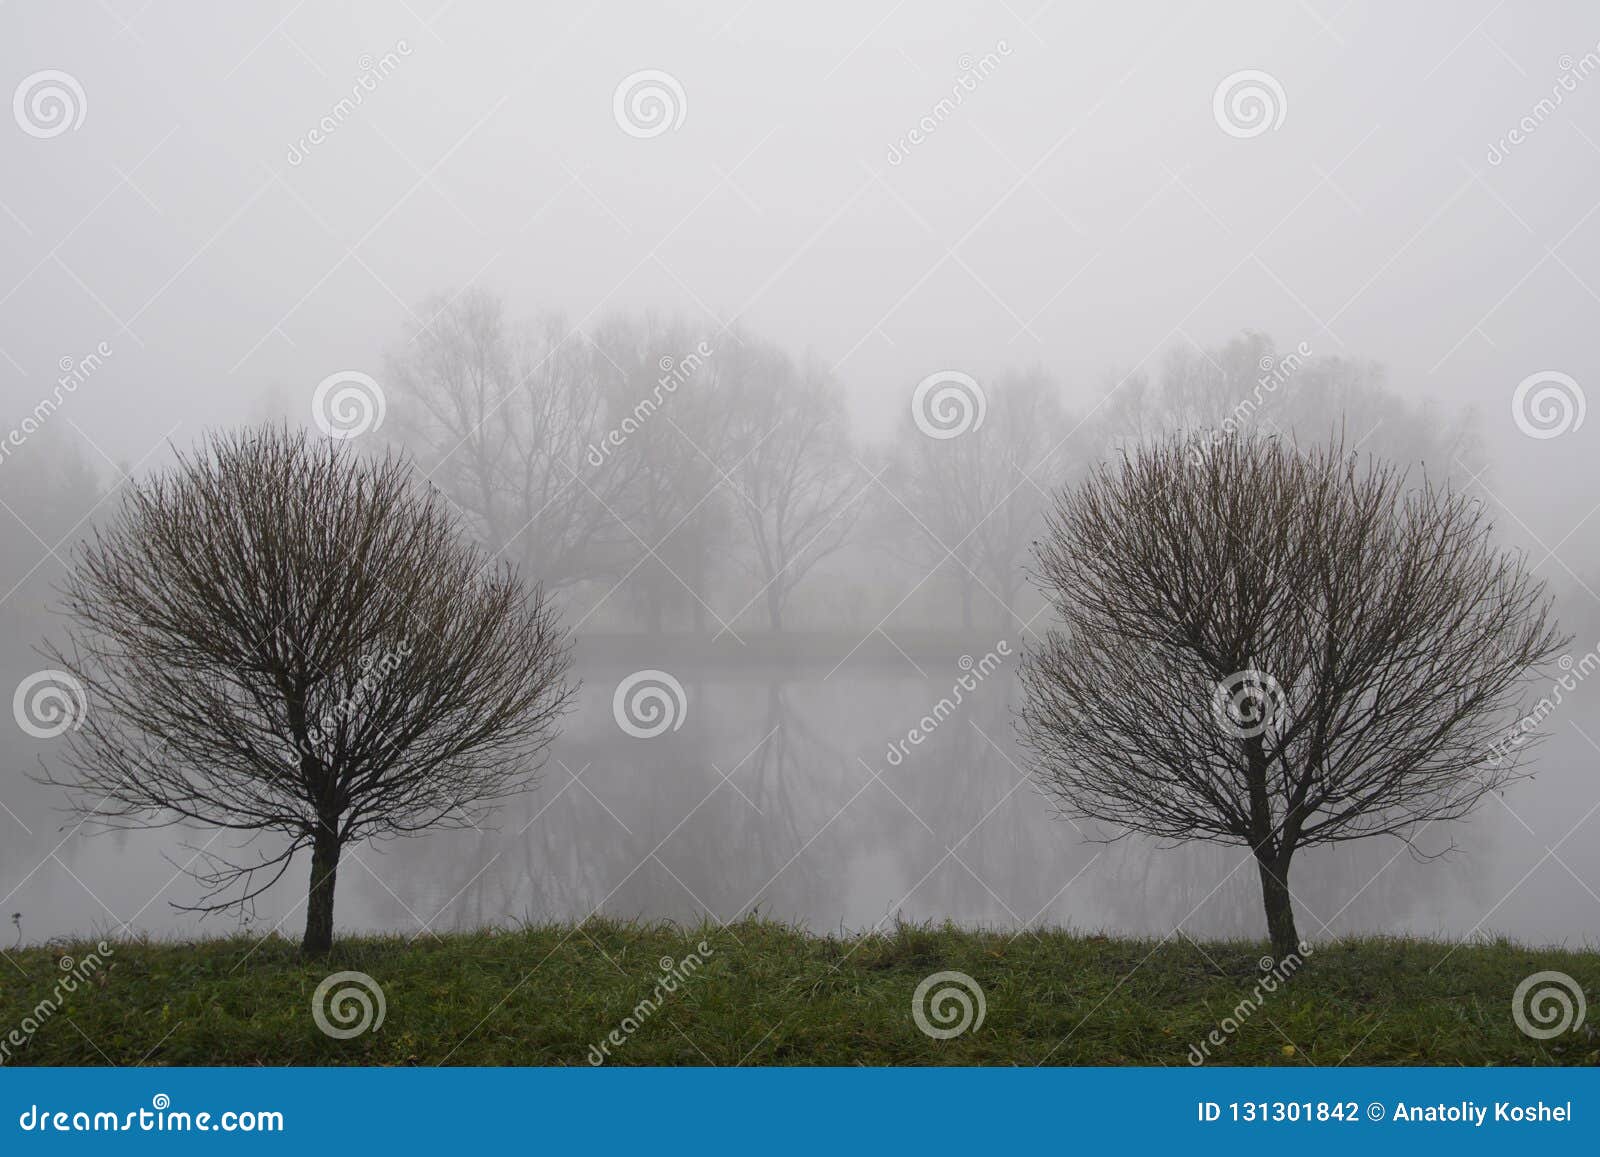 Foggy Morning in November. Bare Tree Branches in the Fall. Fog and